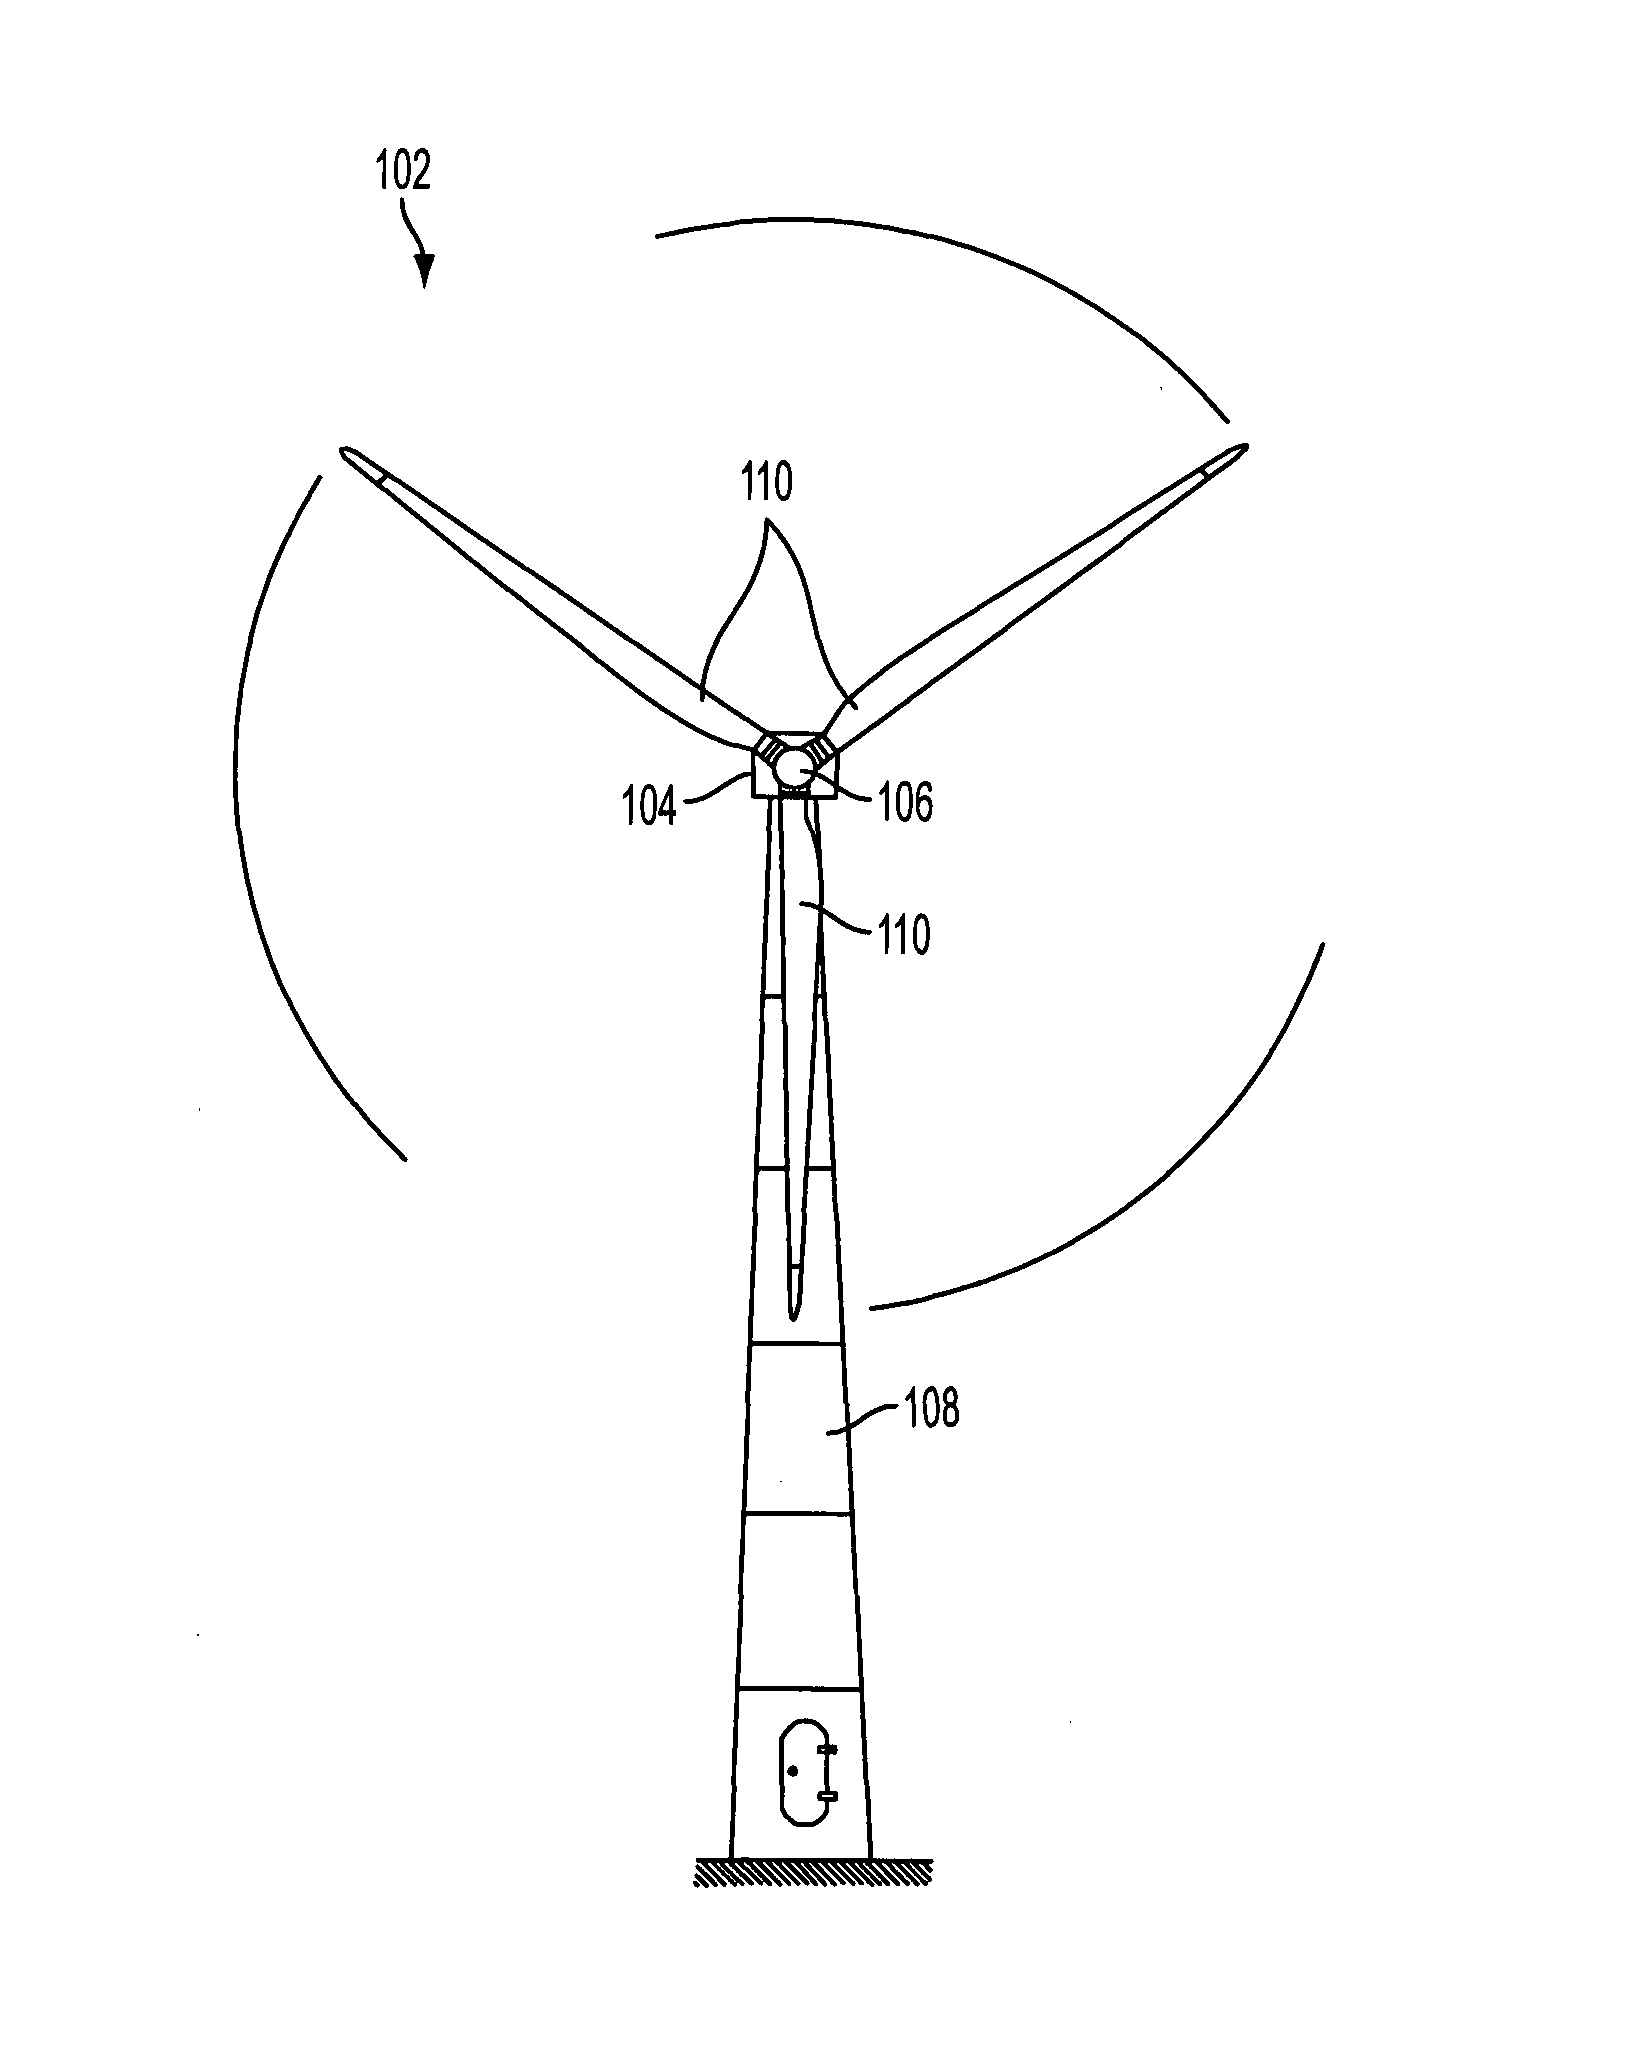 Operating a method for a wind turbine